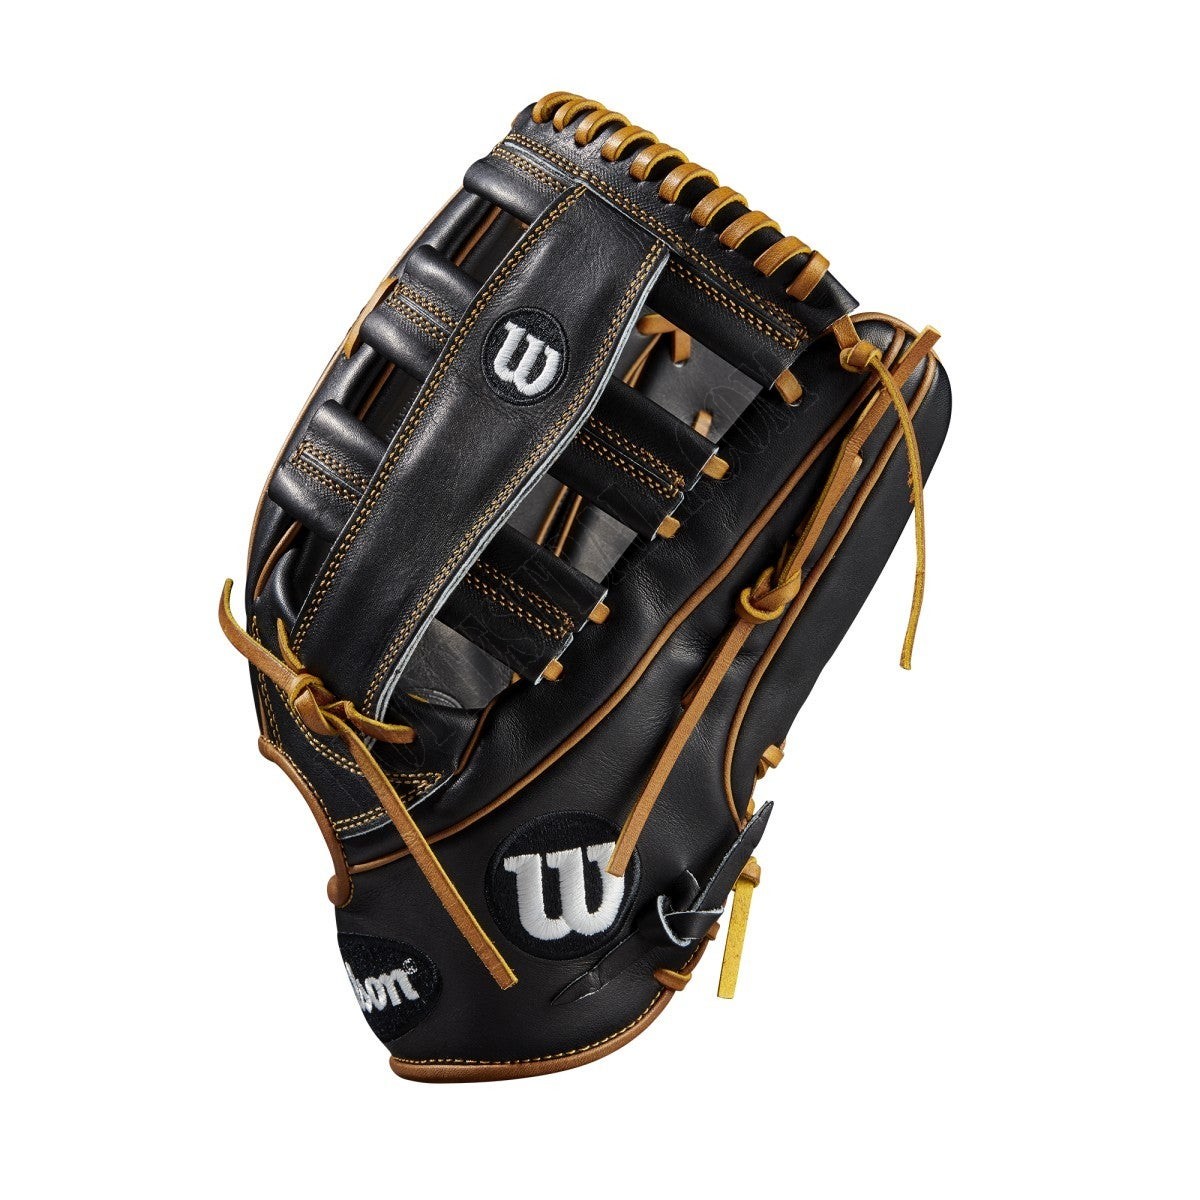 2020 A2K 1775 12.75" Outfield Baseball Glove ● Wilson Promotions - -3